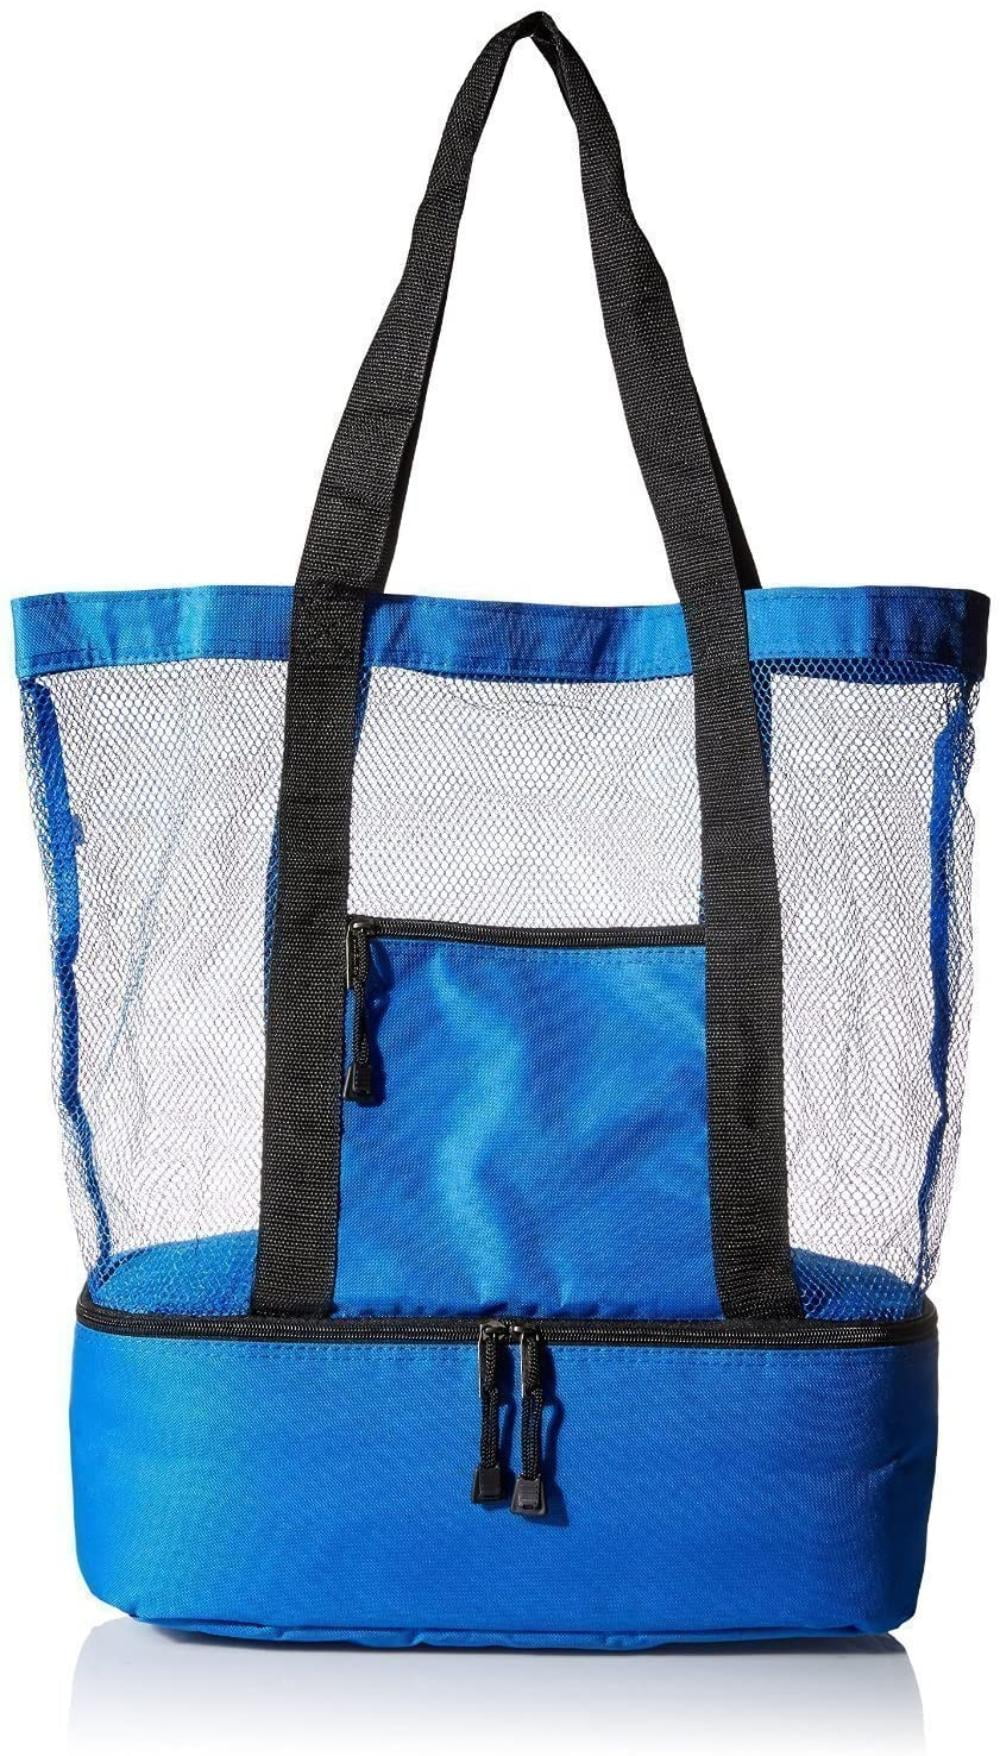 SDI Beach Picnic 12 Can Cooler Tote Bag - Blue, Made of 600d polyester ...